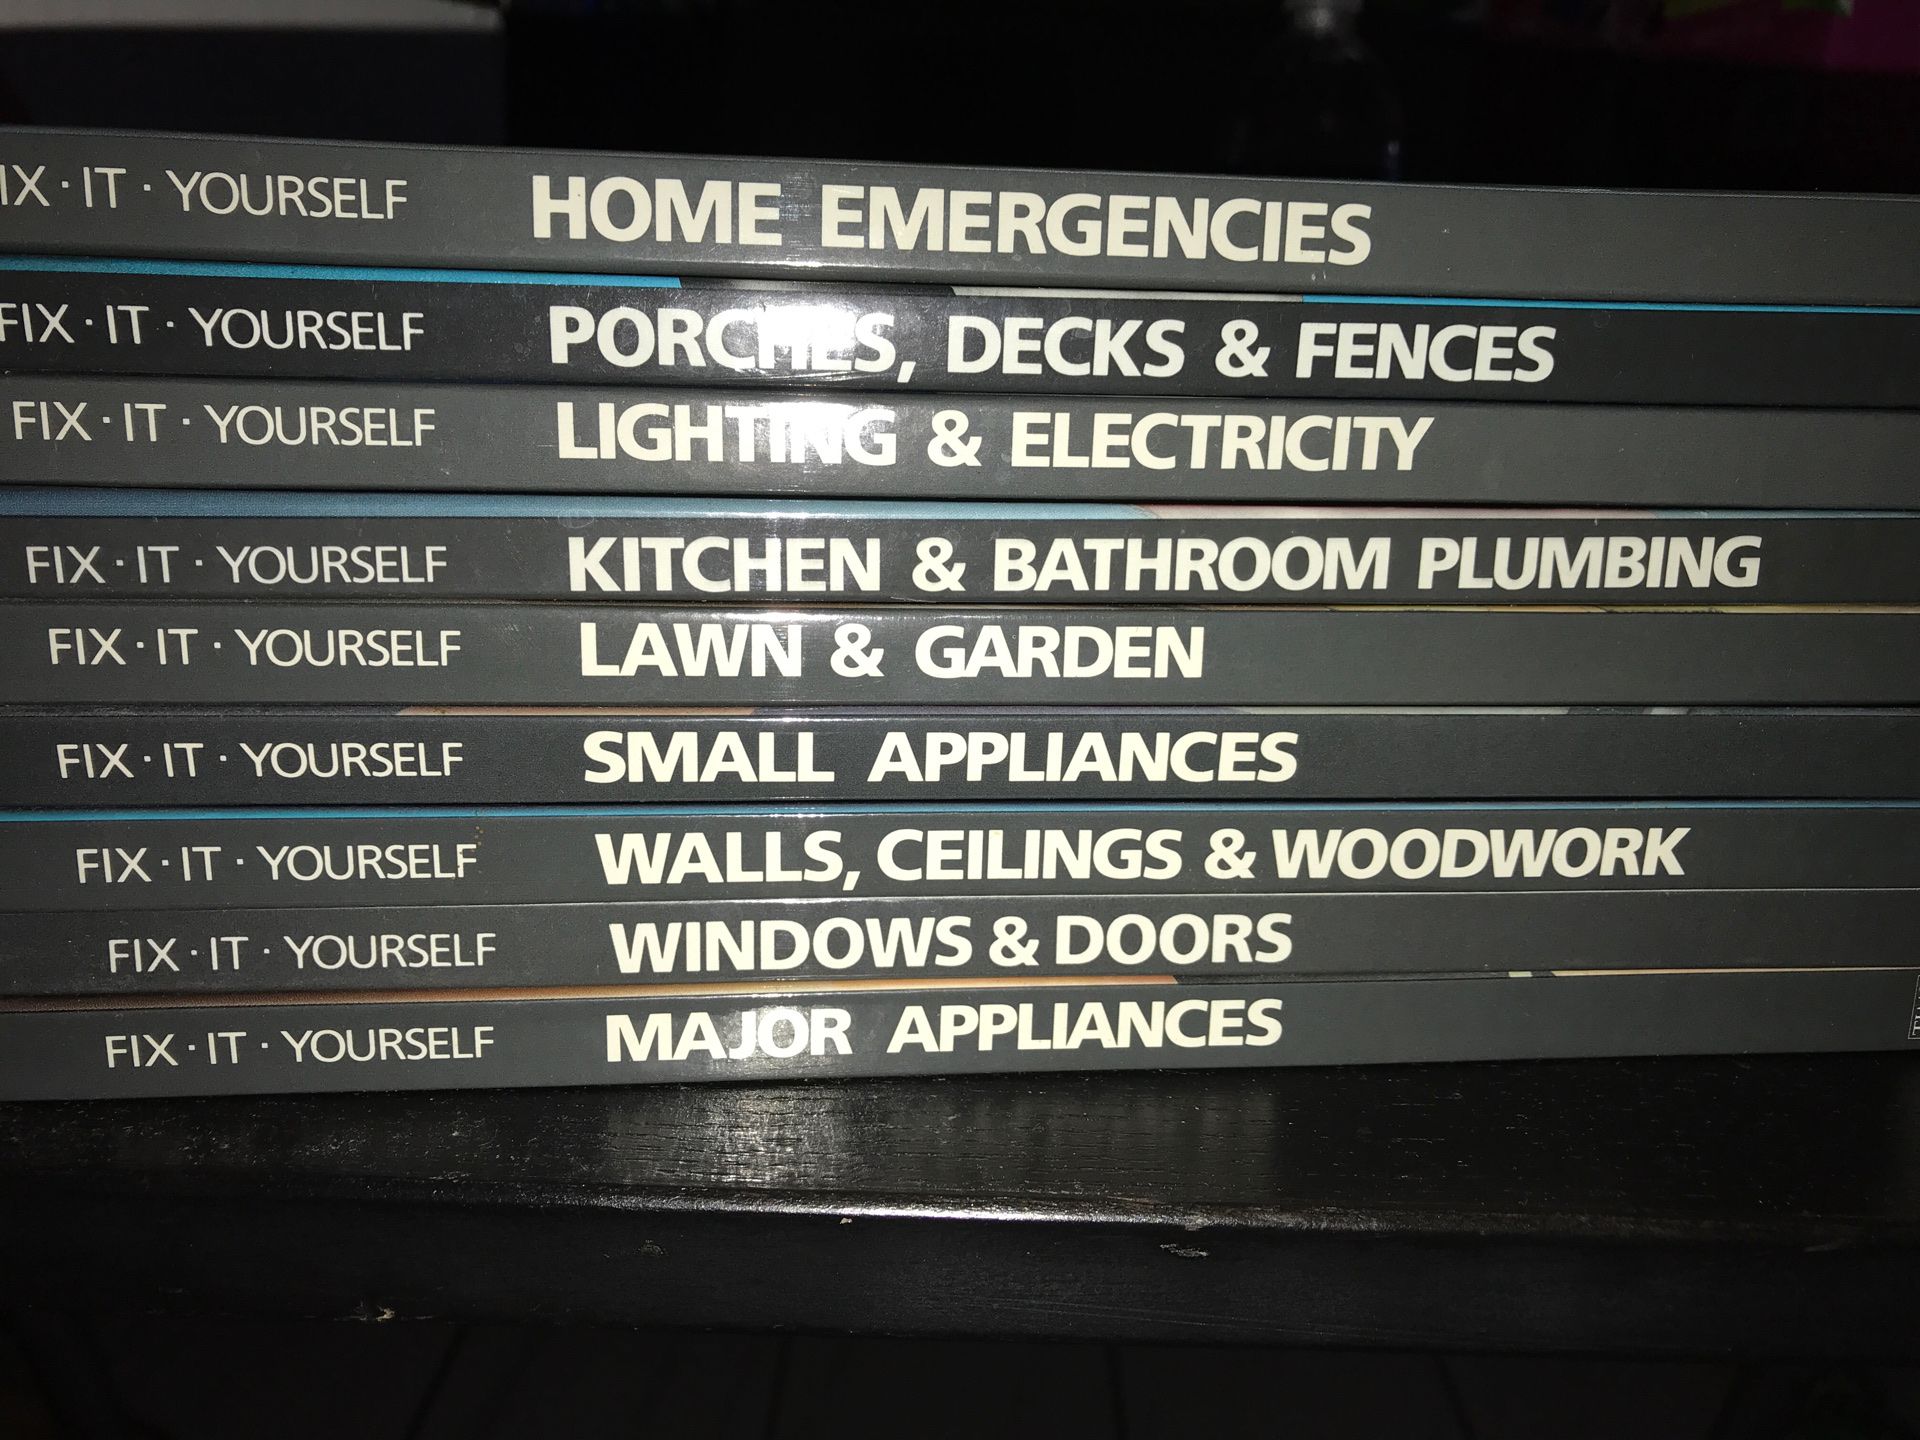 Set of fix it yourself books